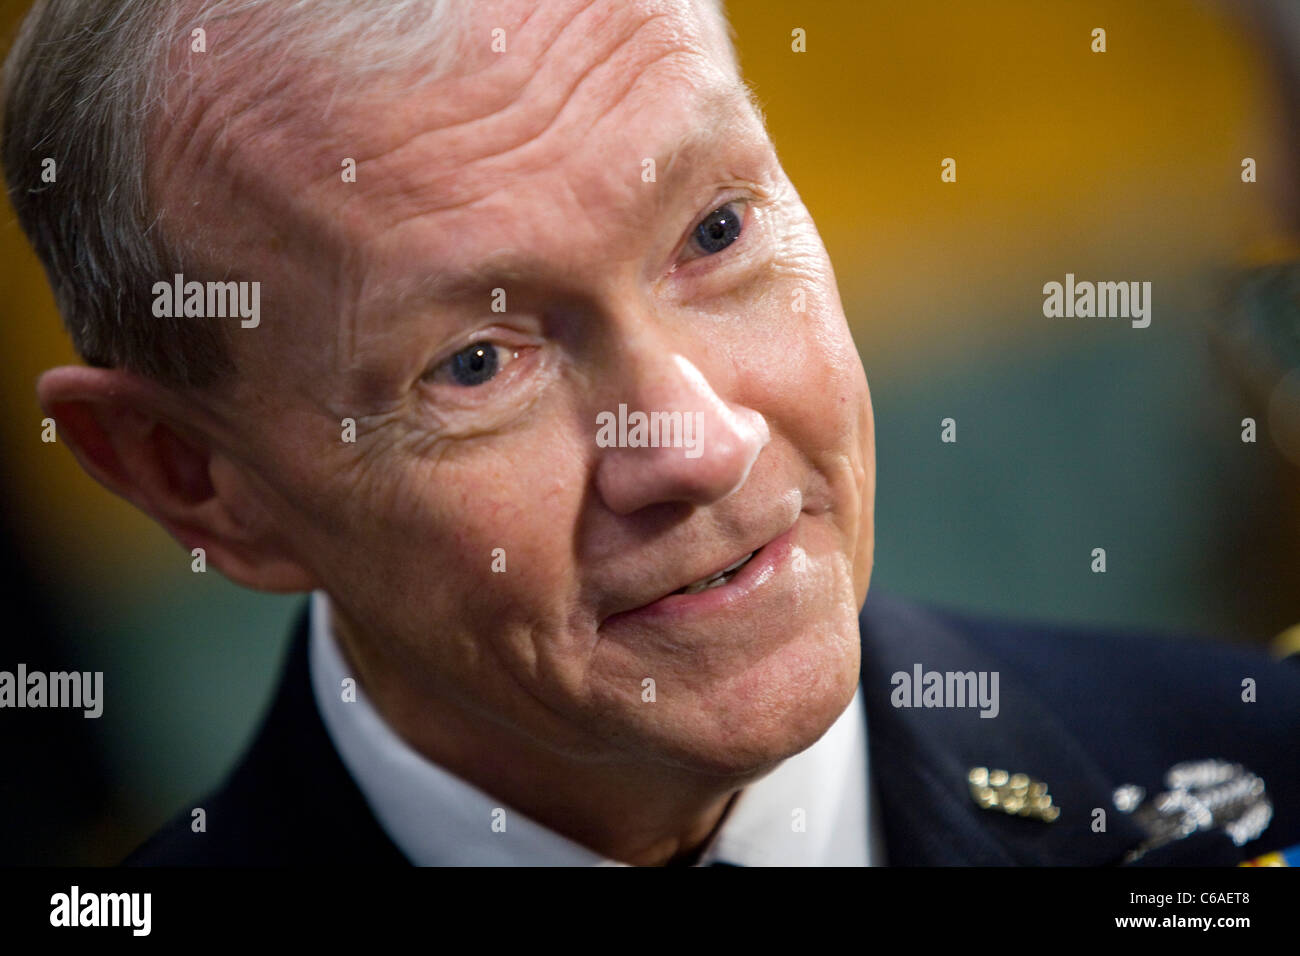 Army General Martin Dempsey during his Senate confirmation hearing to become Chairman of the Joint Chiefs of Staff.  Stock Photo